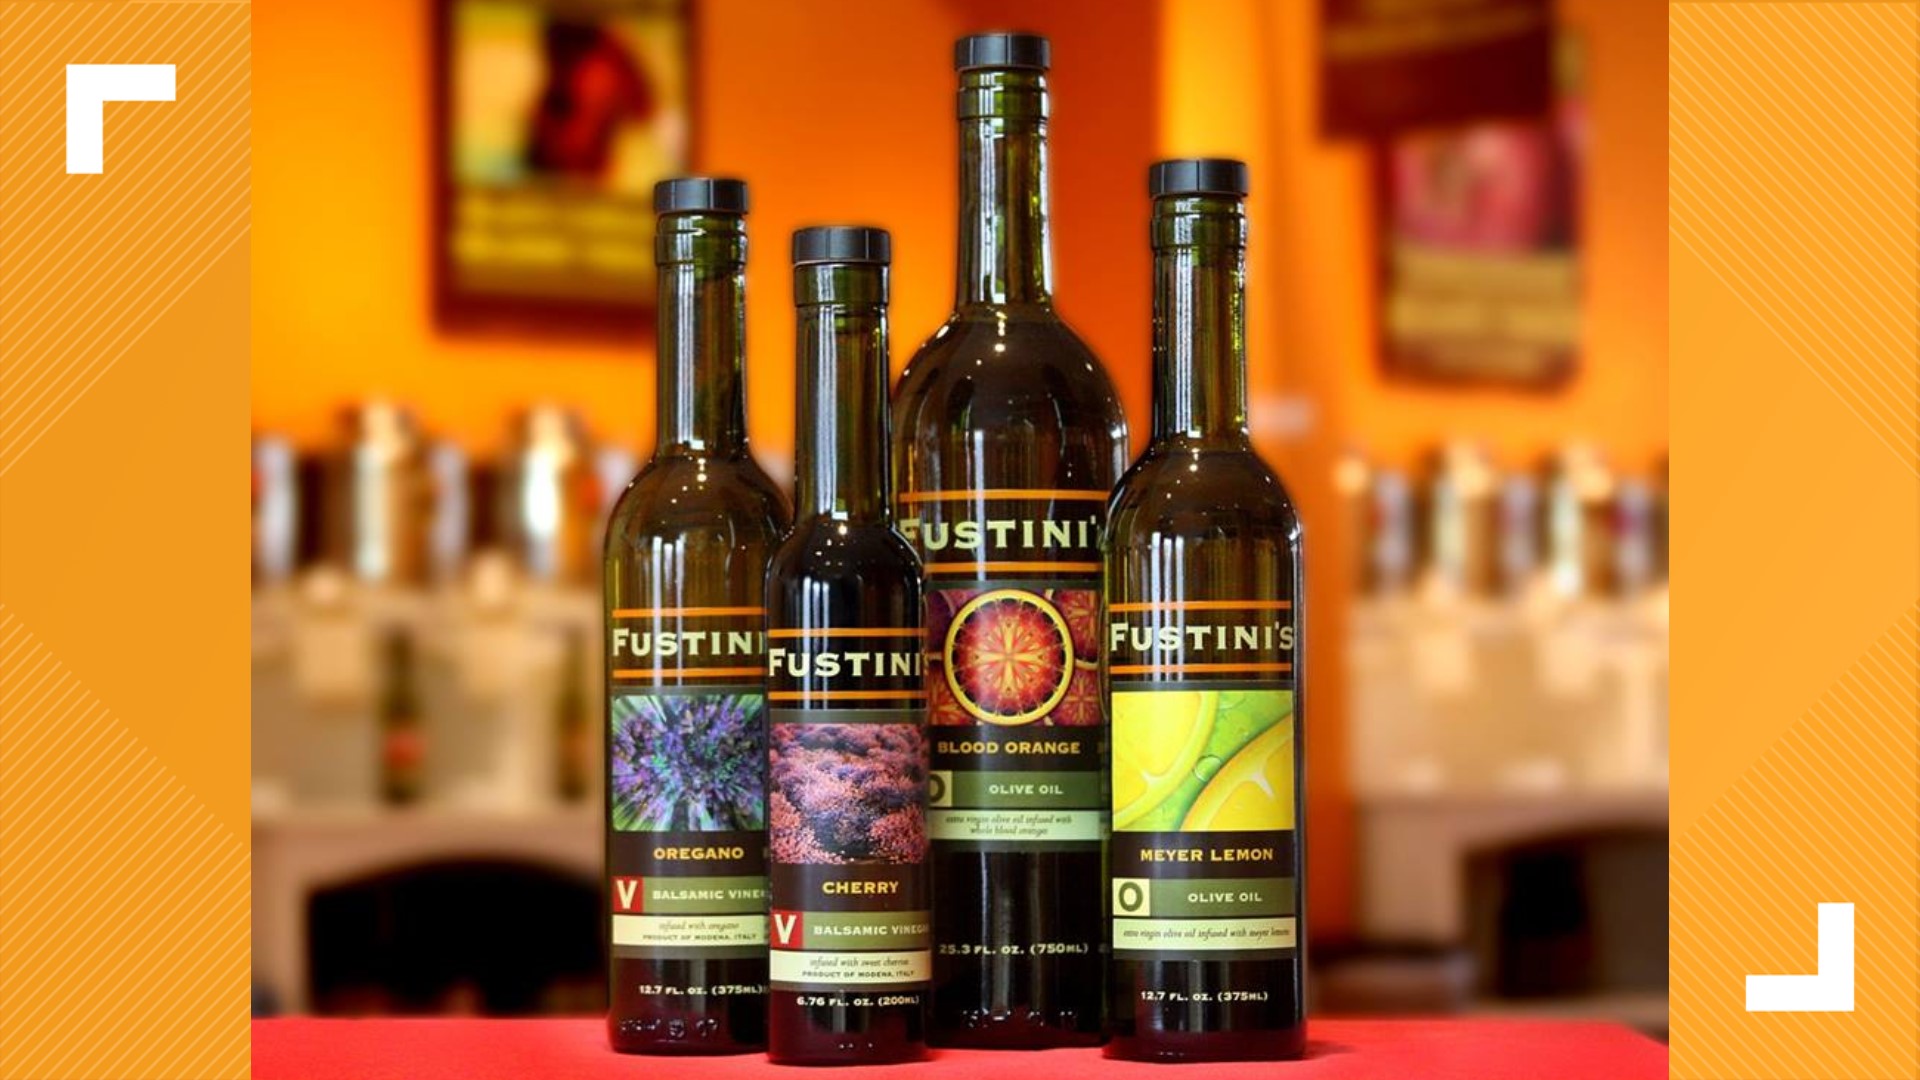 This holiday season, make sure you pick up a bottle of Fustini’s oil.  They offer a wide variety of products including vinegar and balsamic.